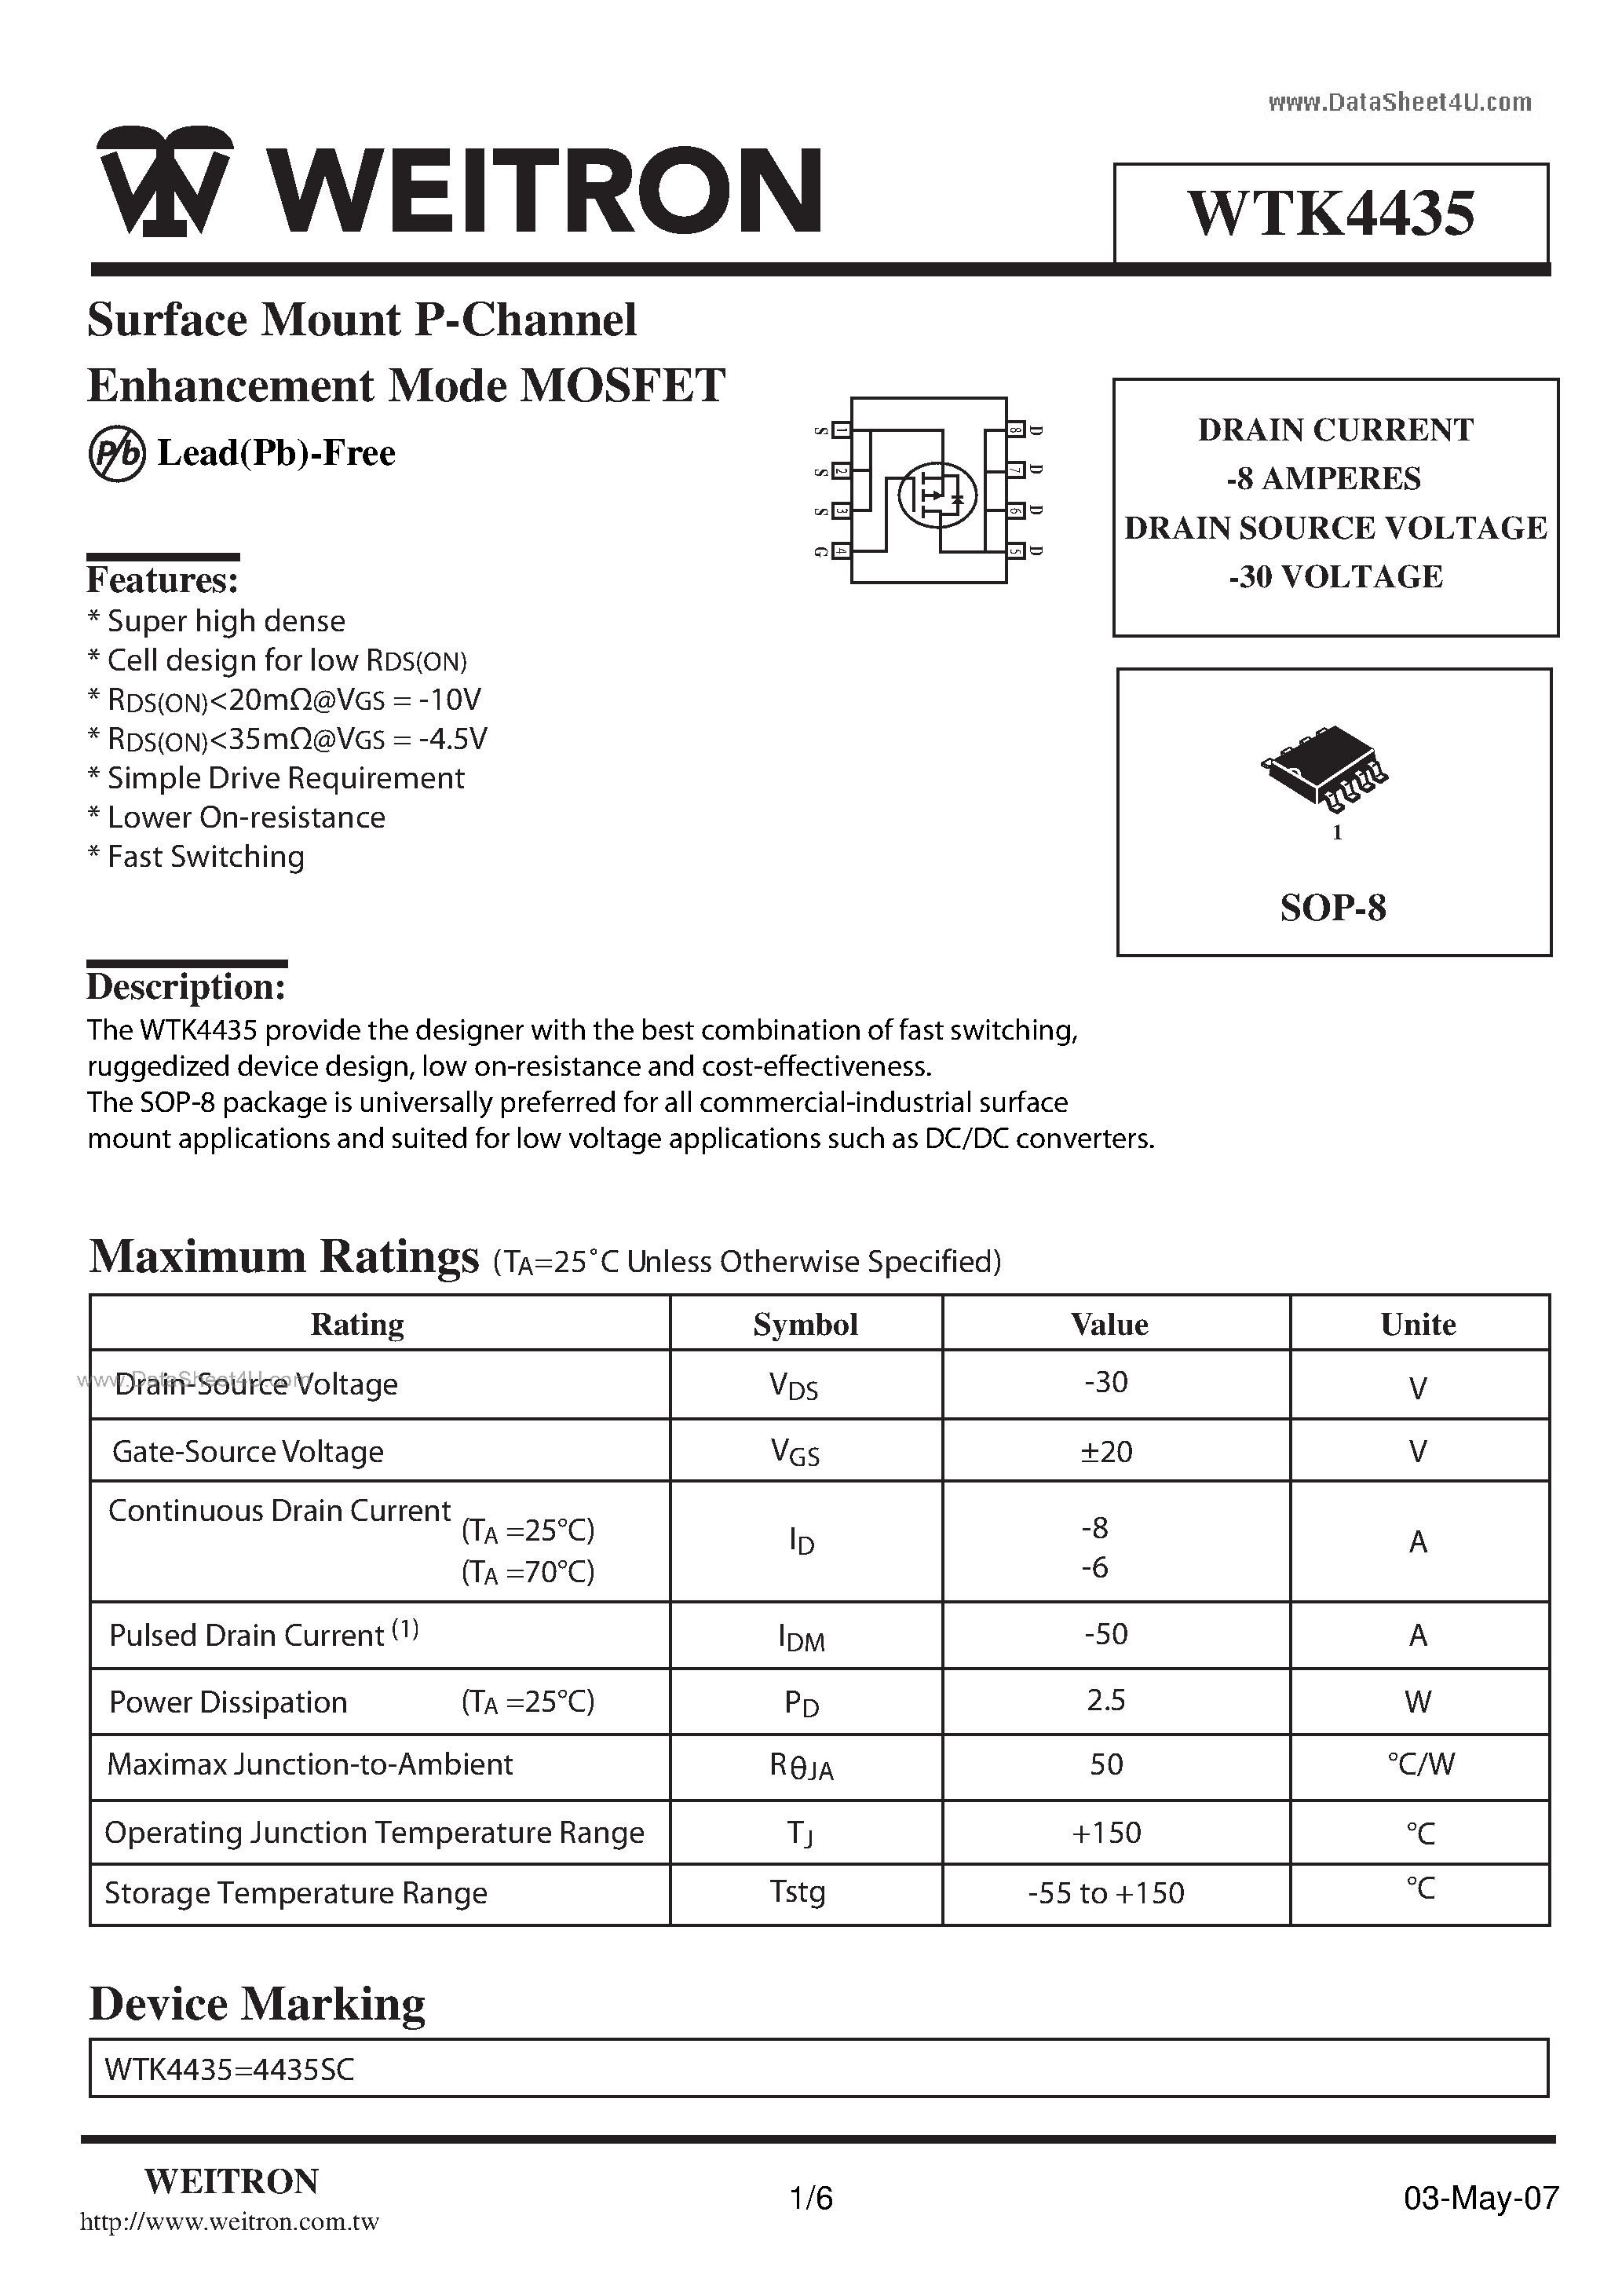 Datasheet WTK4435 - Surface Mount P-Channel Enhancement Mode MOSFET page 1